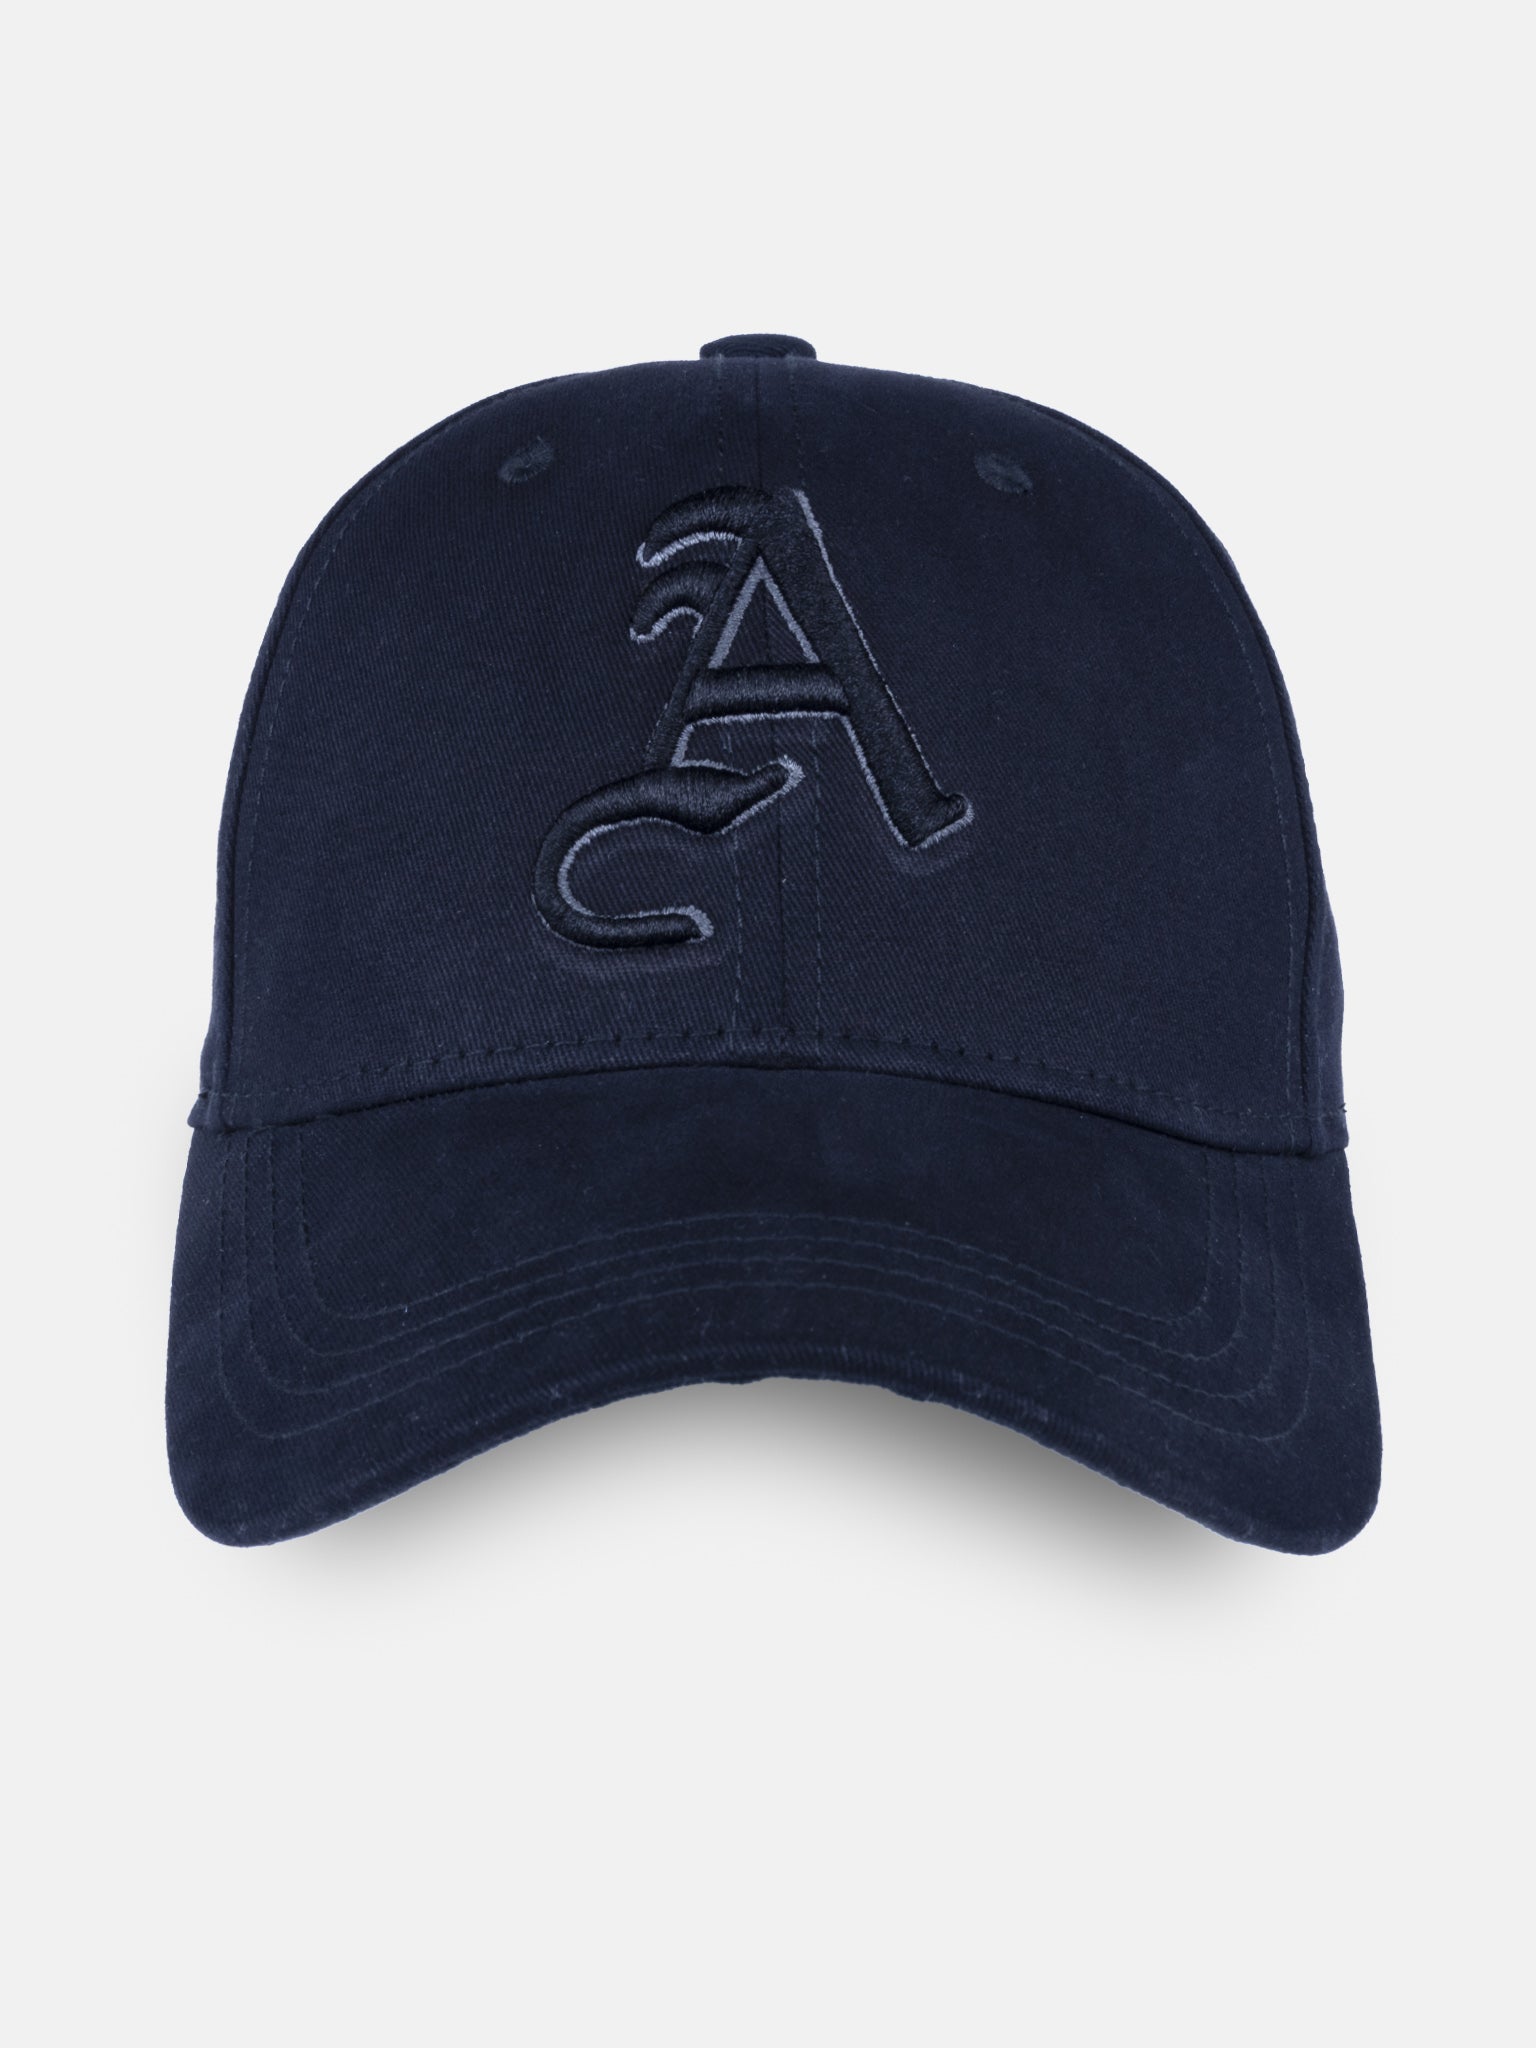 Black Letter 'A' Embroidered Cap